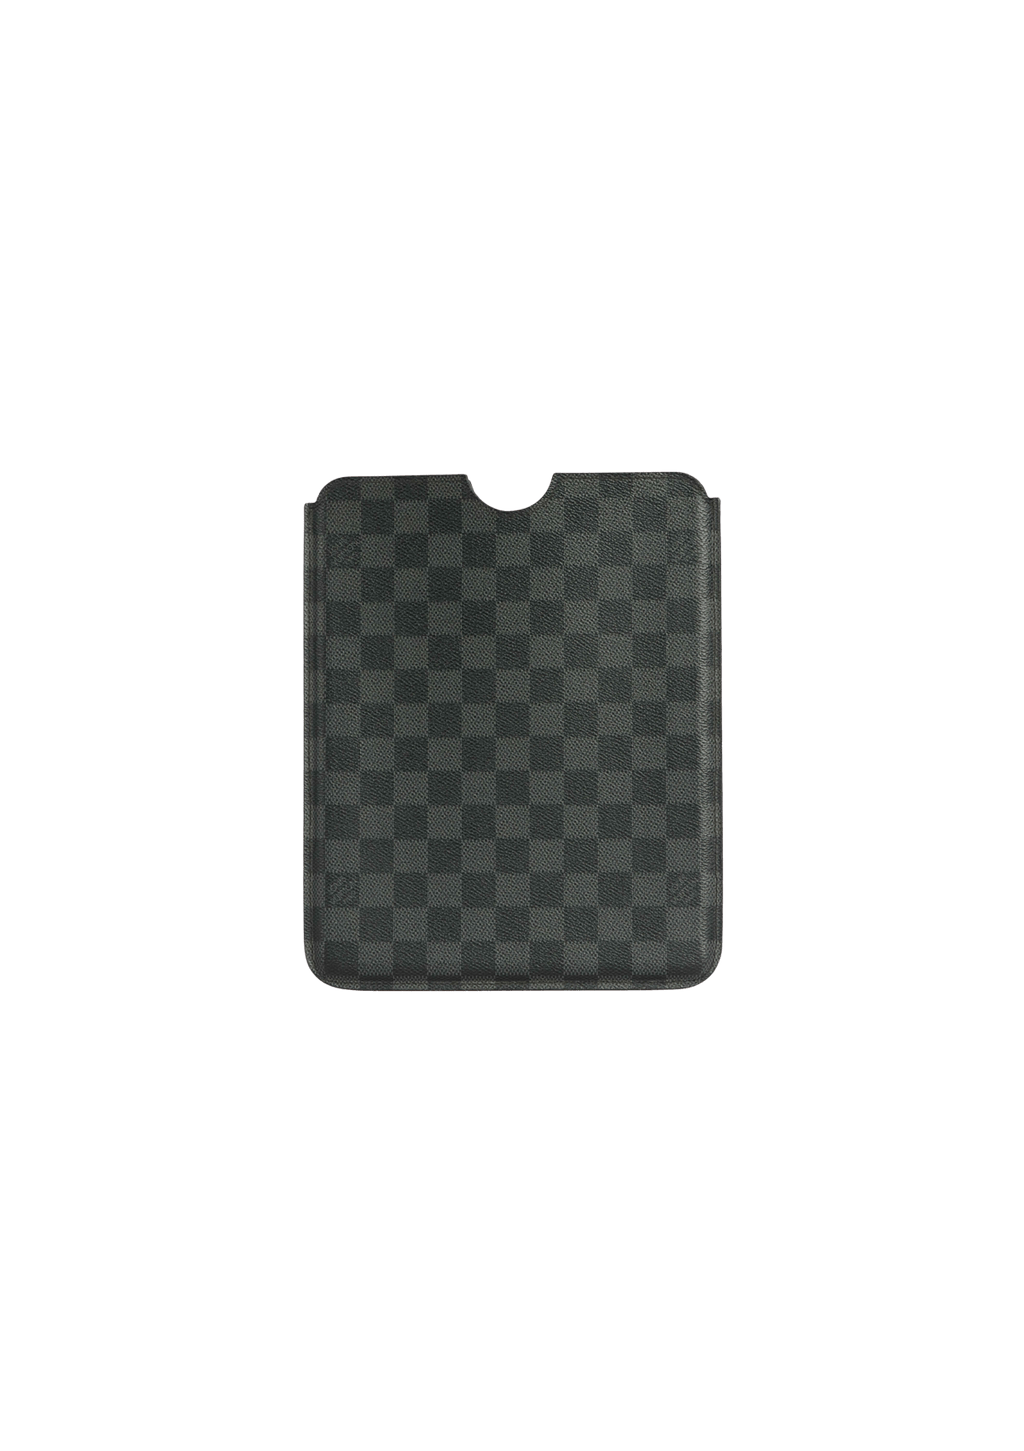 LOUIS VUITTON, cases for Ipad and Iphone 4 in damier graphite